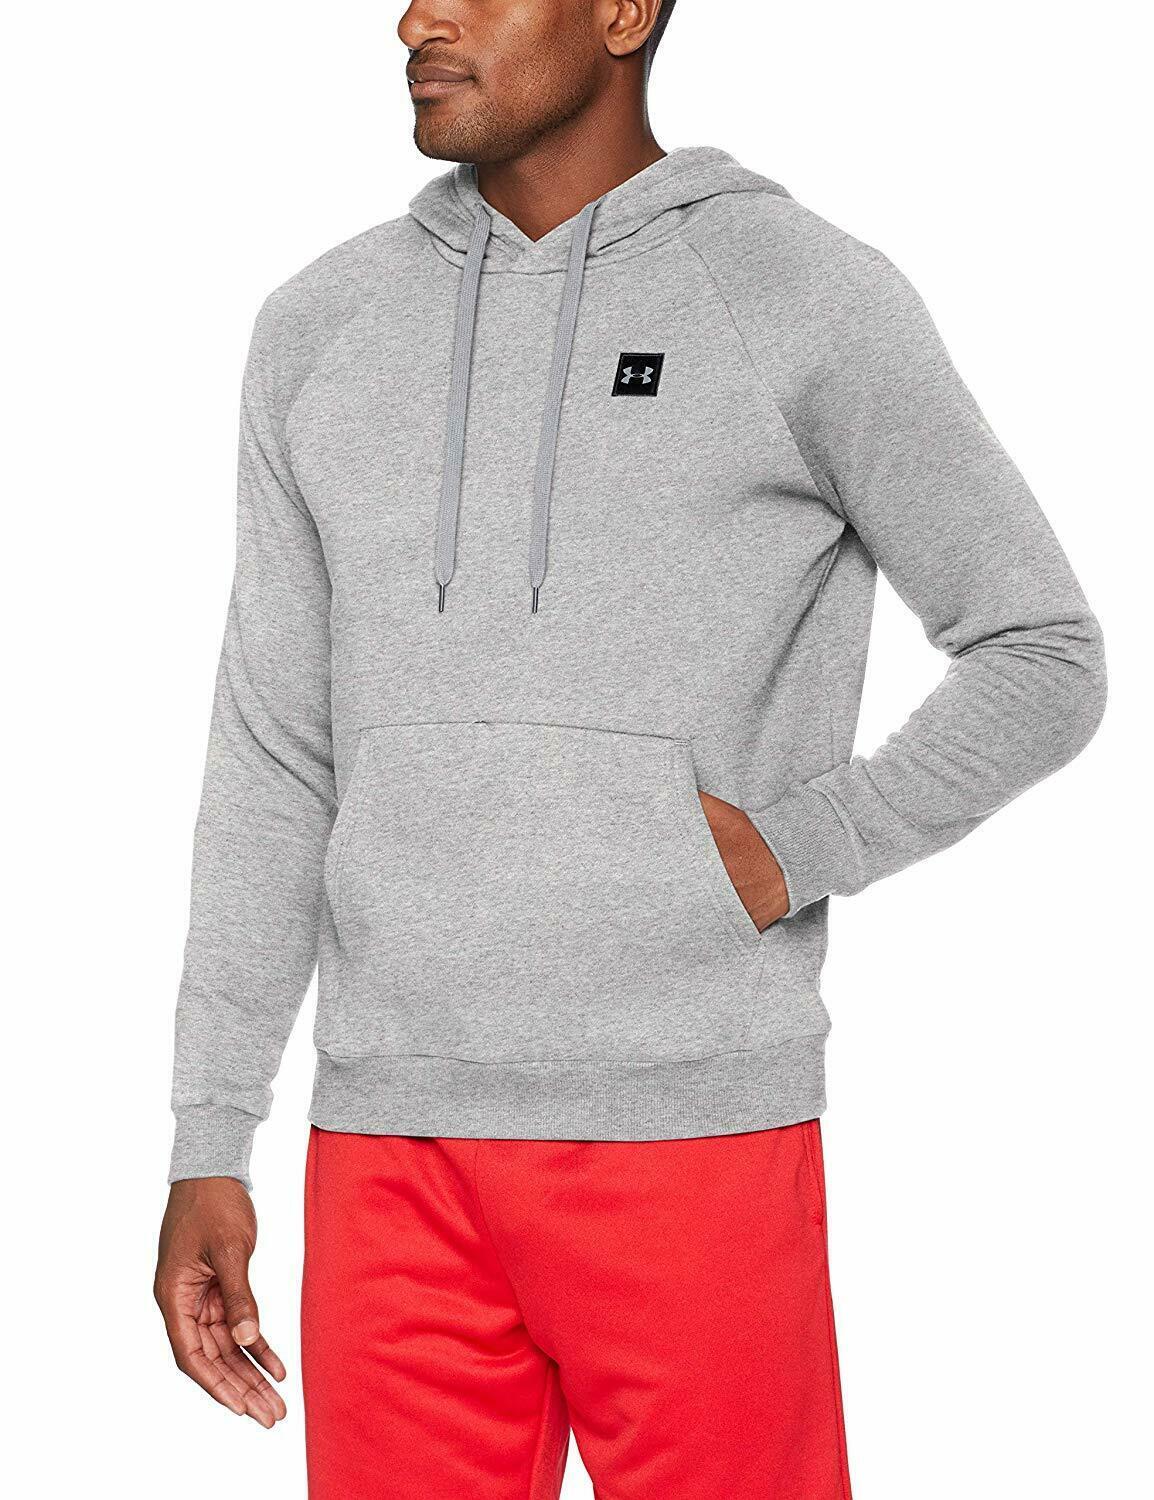 Under Armour Rival Fleece Pull Over Hoodie 3/3